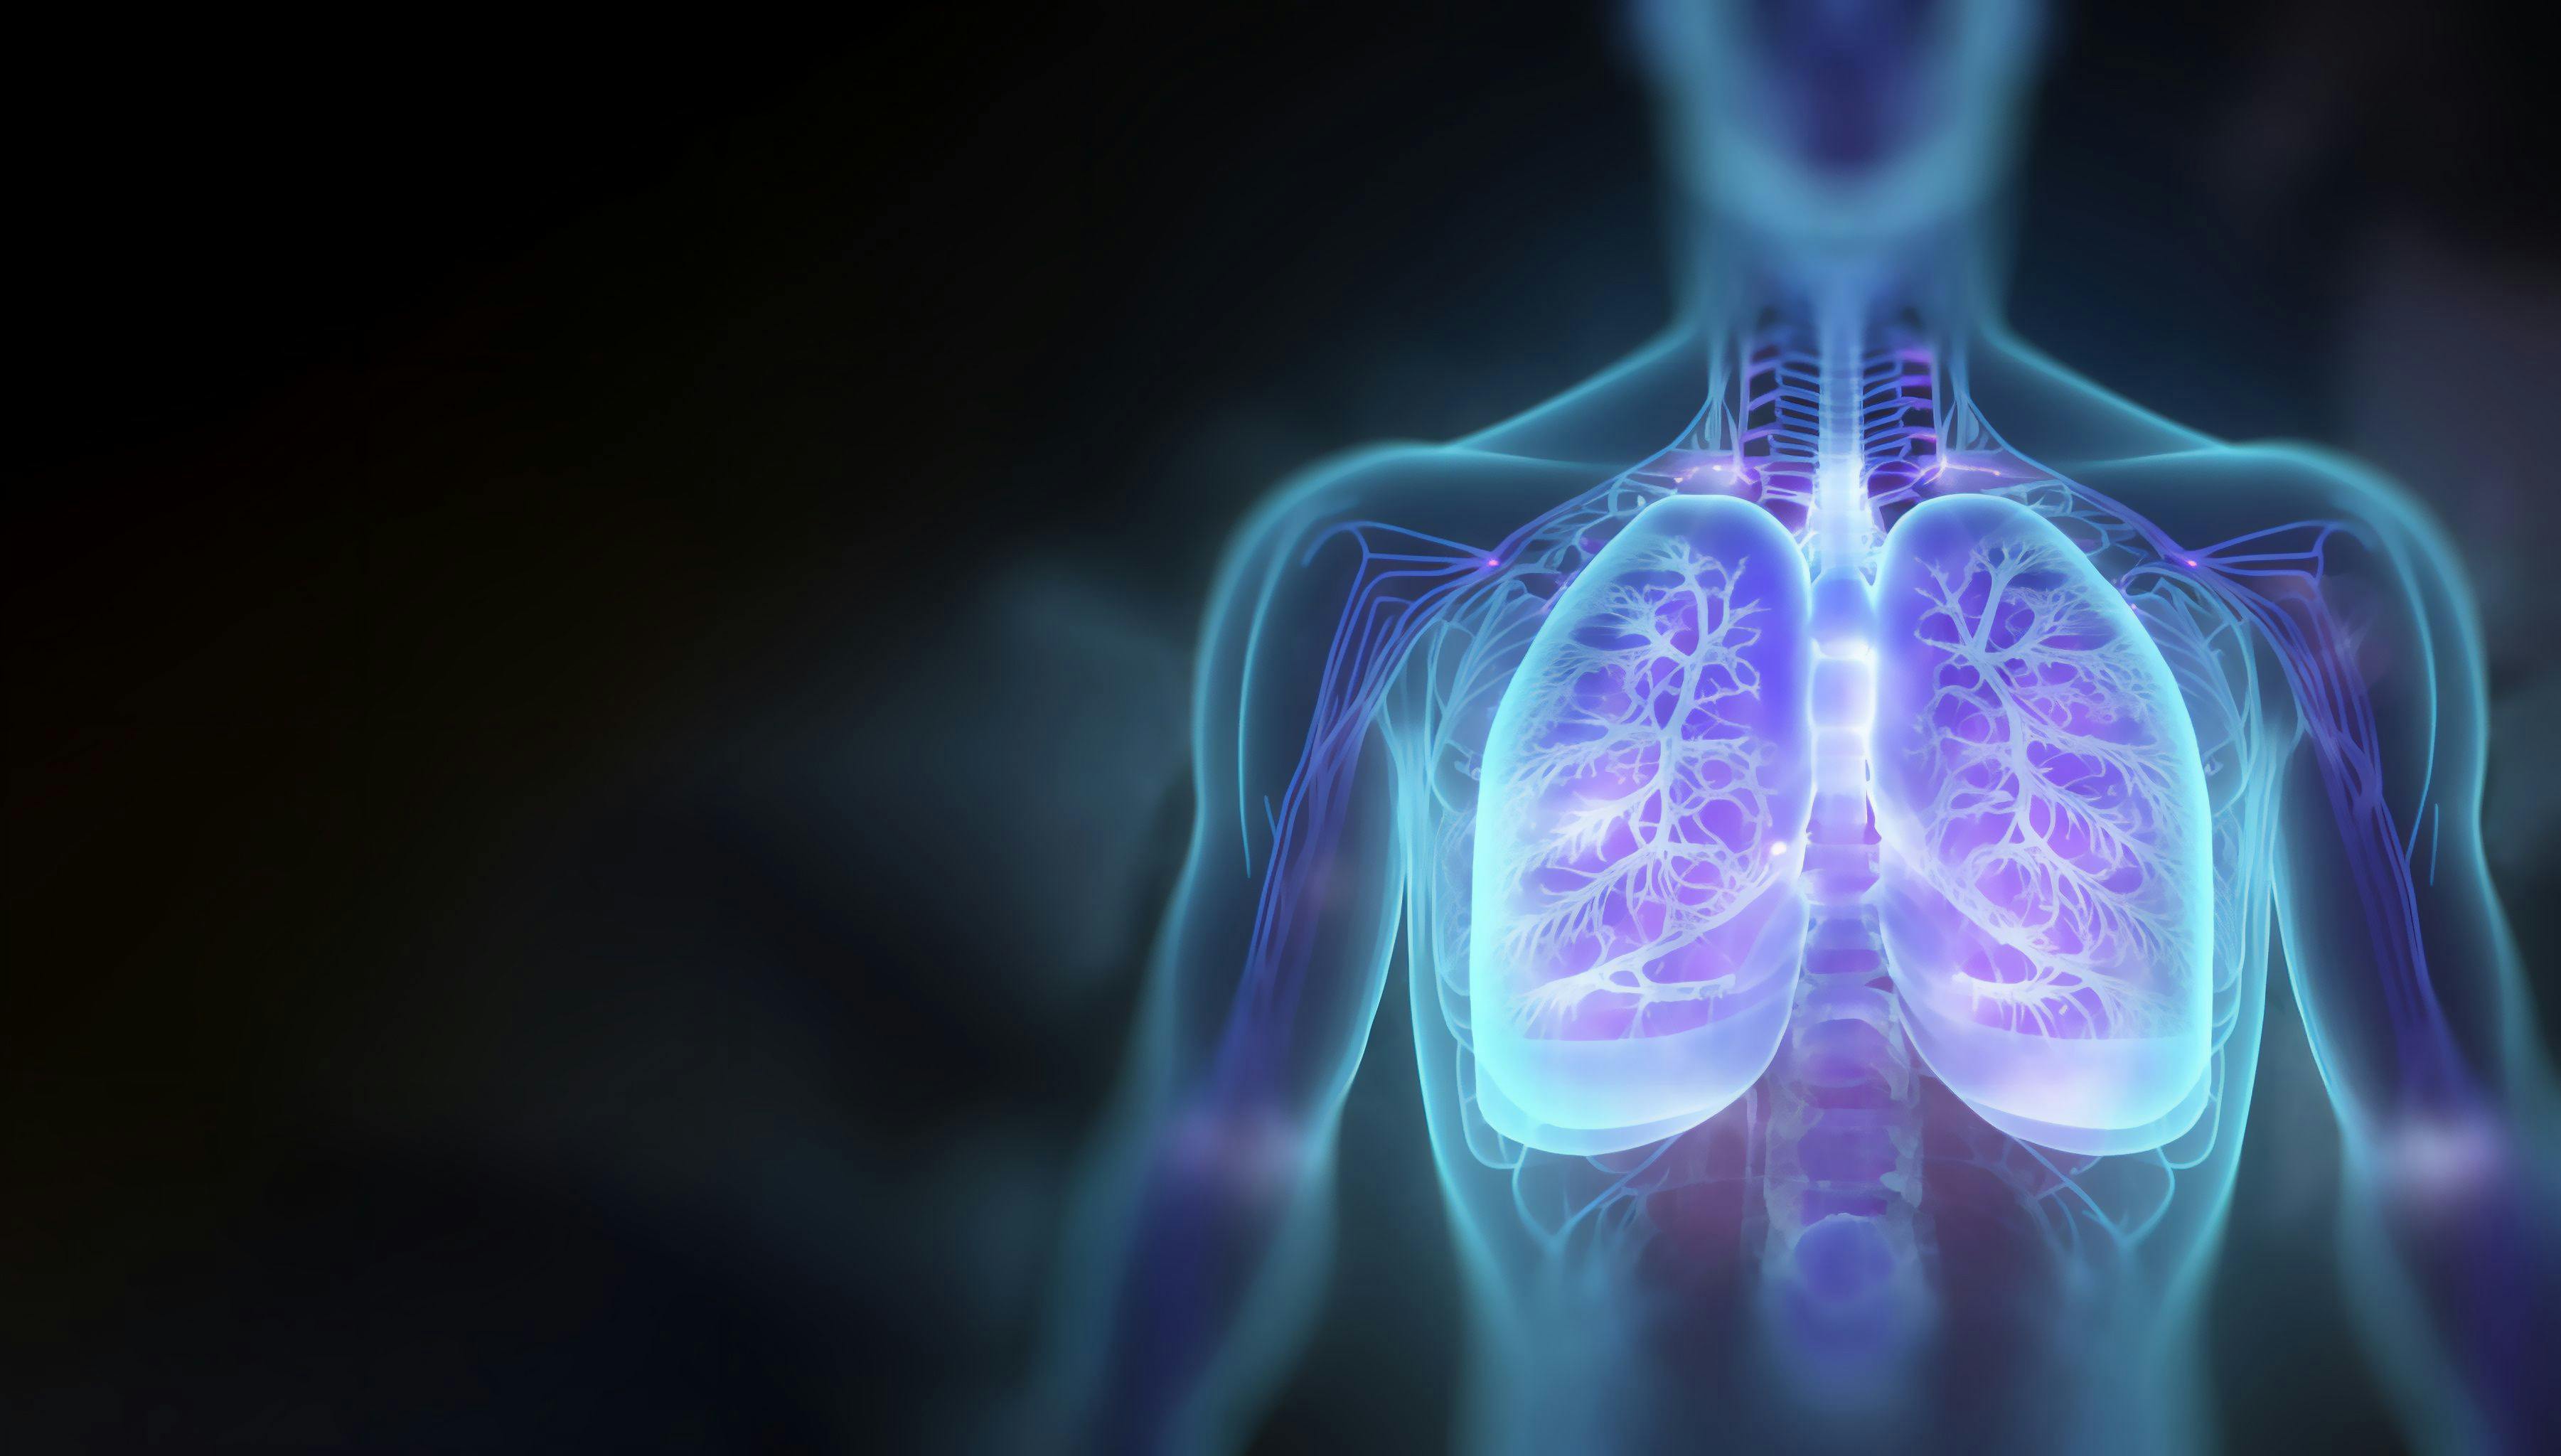 Holographic concept of lung cancer display, lung disease, treatment of lung cancer: © catalin - stock.adobe.com